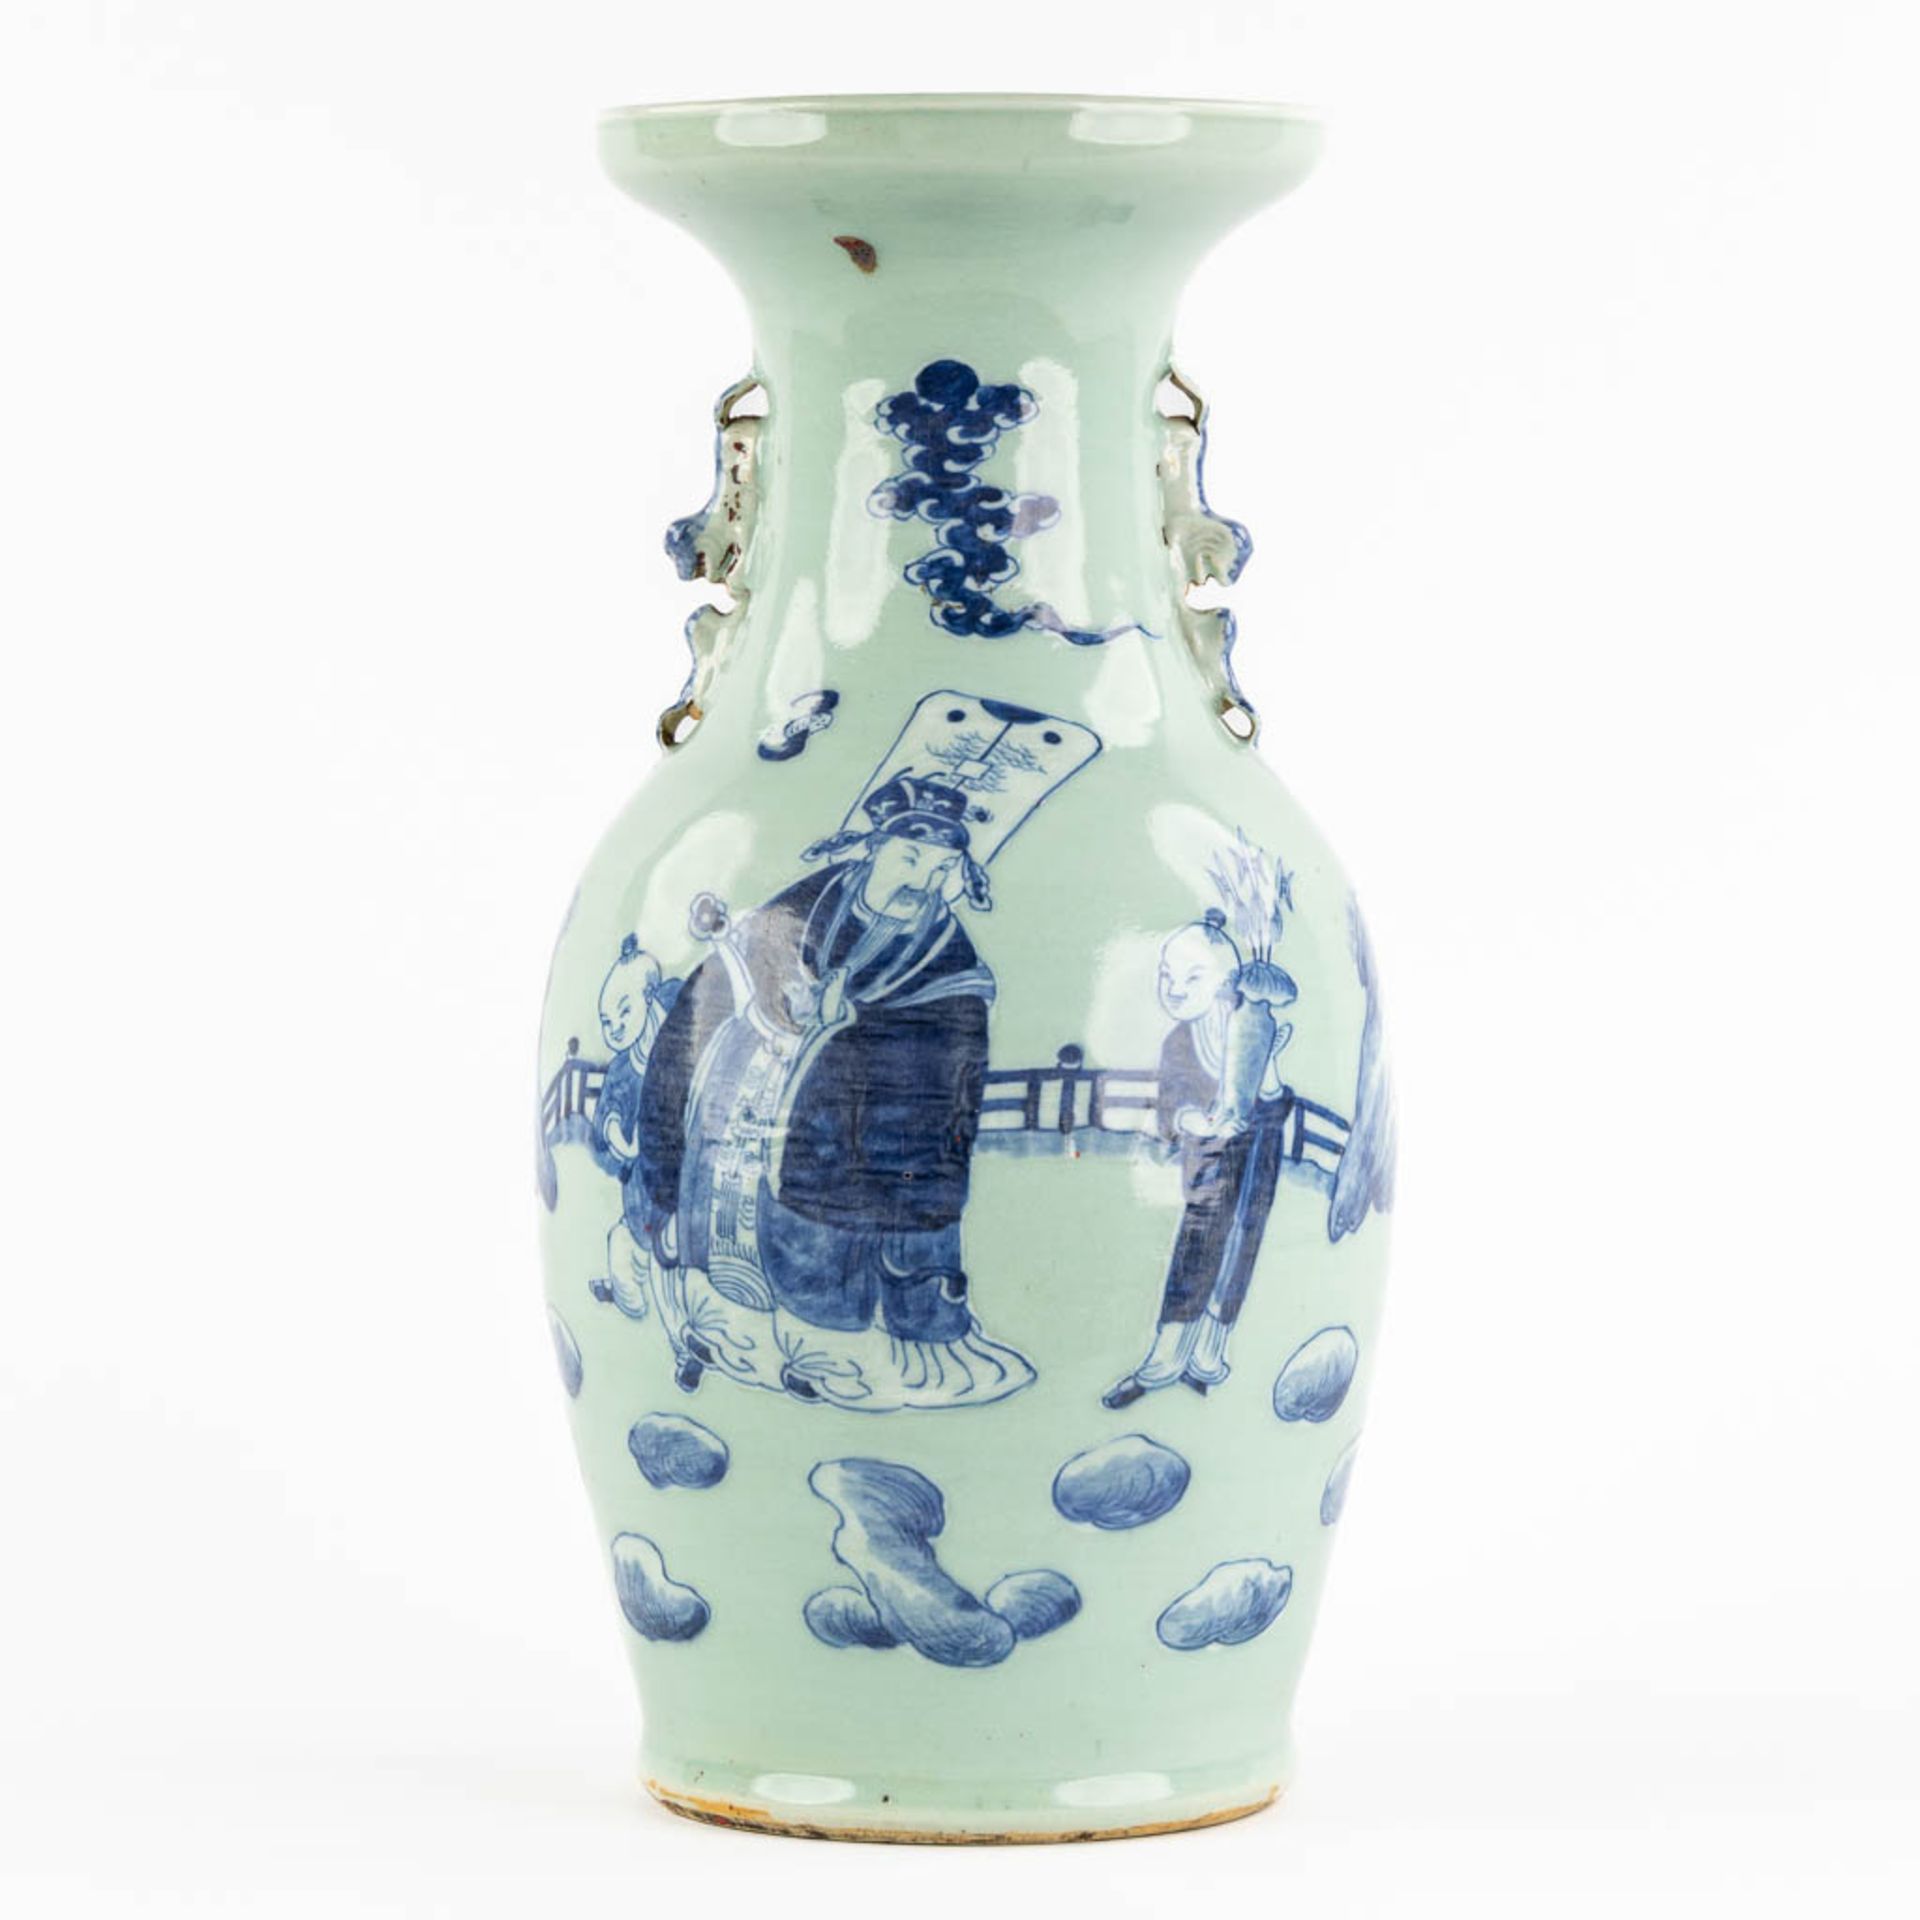 A Chinese vase decorated with a 'Wise man and a child'. 19th C. (H:43 x D:22 cm)